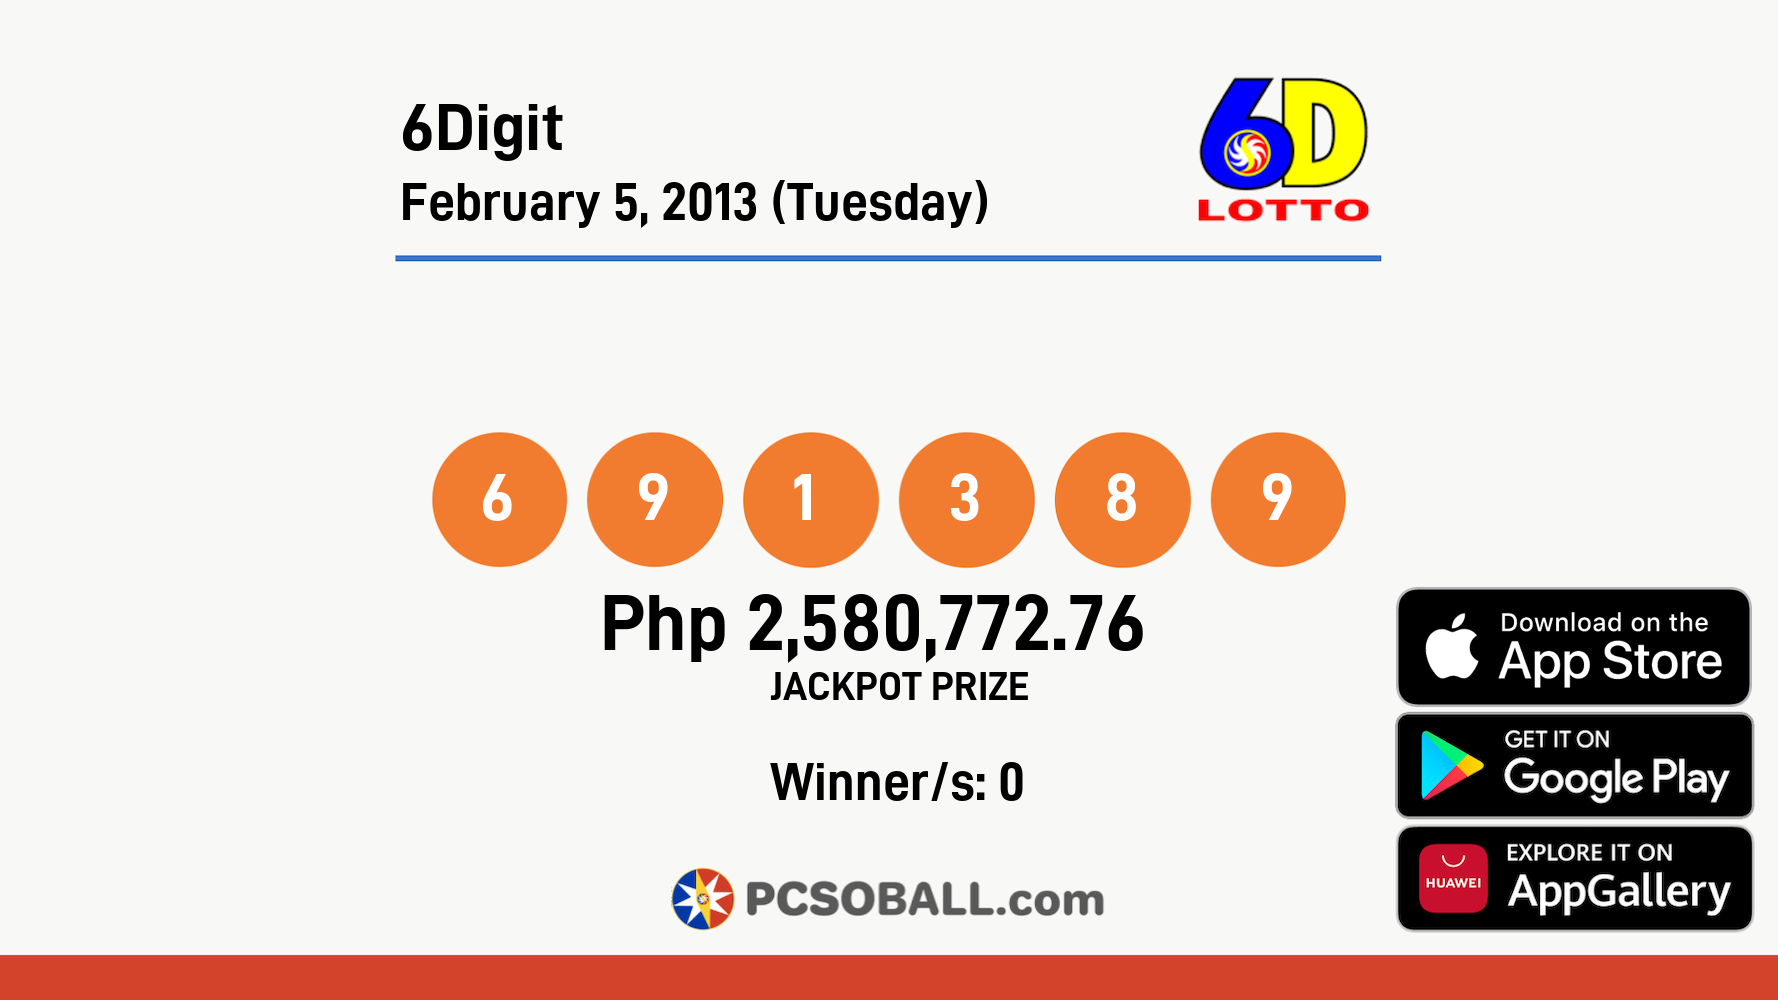 6Digit February 5, 2013 (Tuesday) Result